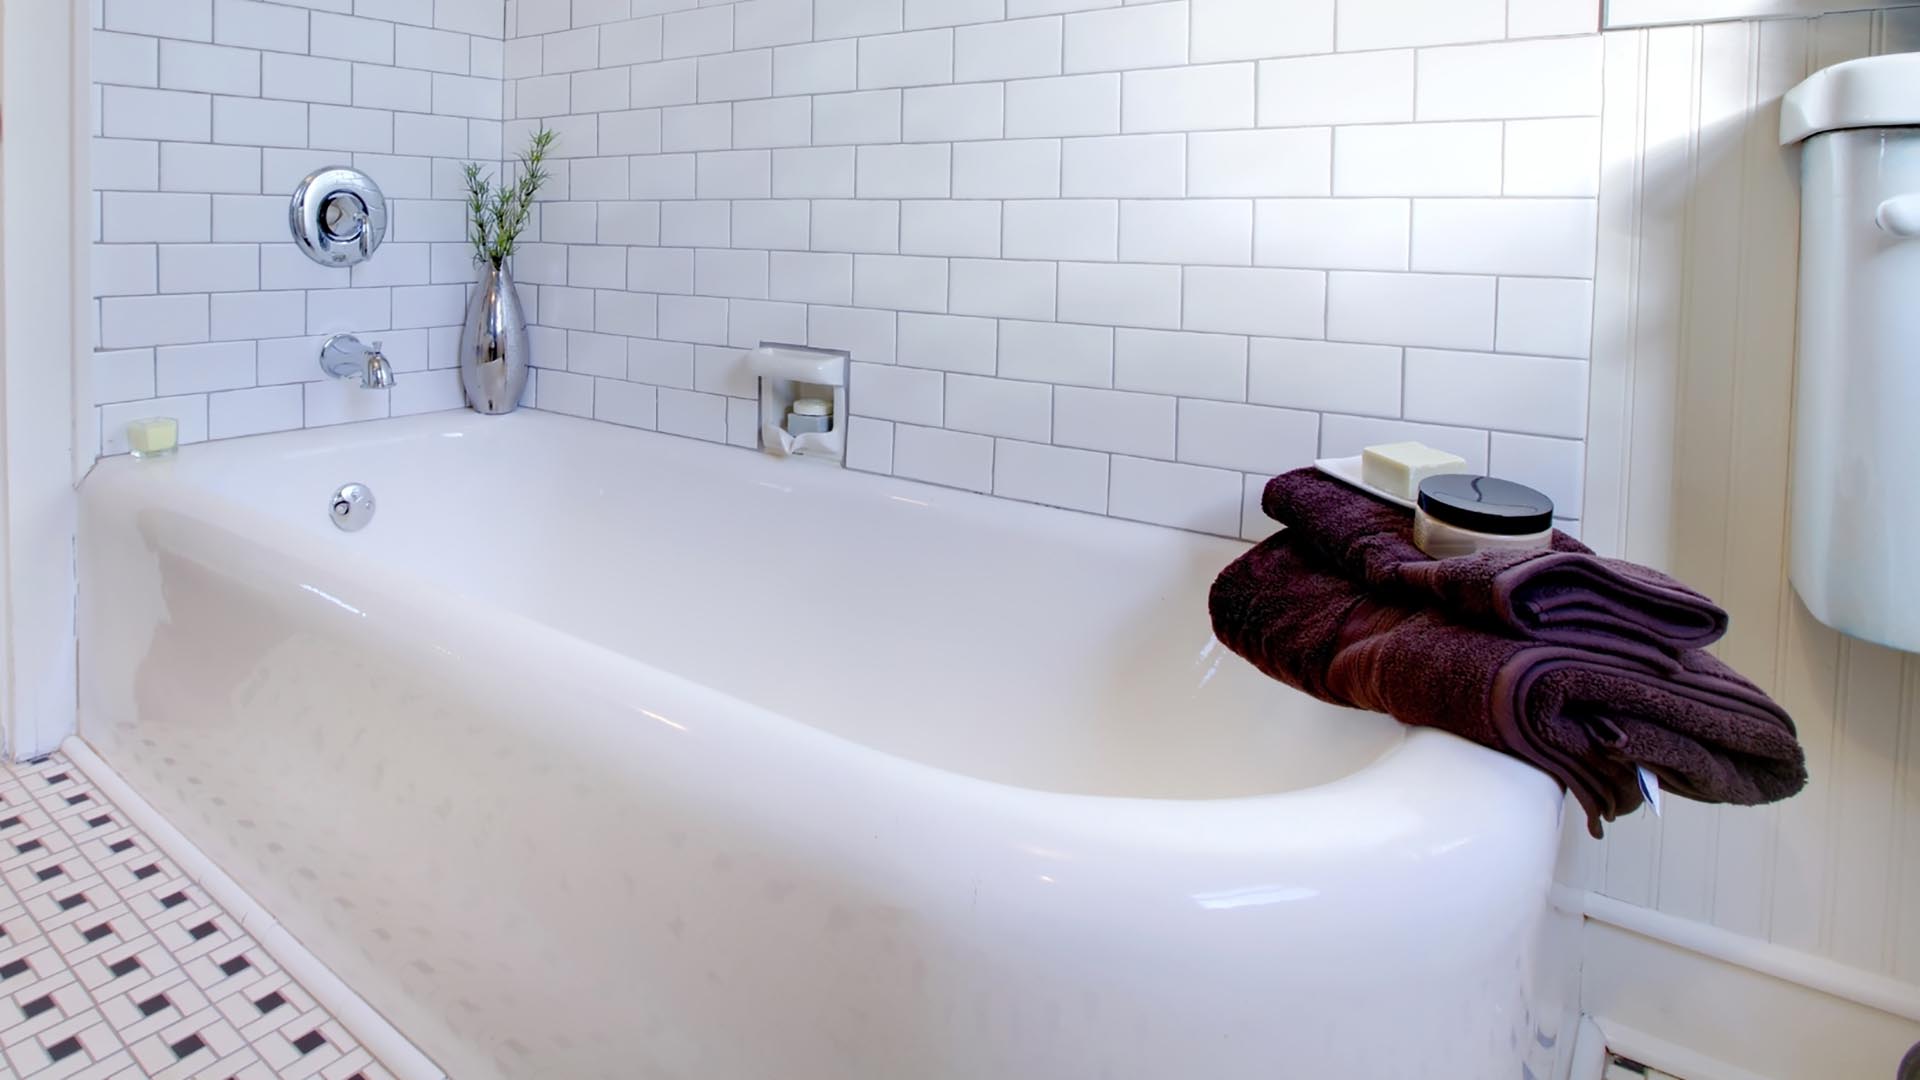 Safely Remove An Old And Heavy Bath Tub, How To Remove An Old Ceramic Bathtub